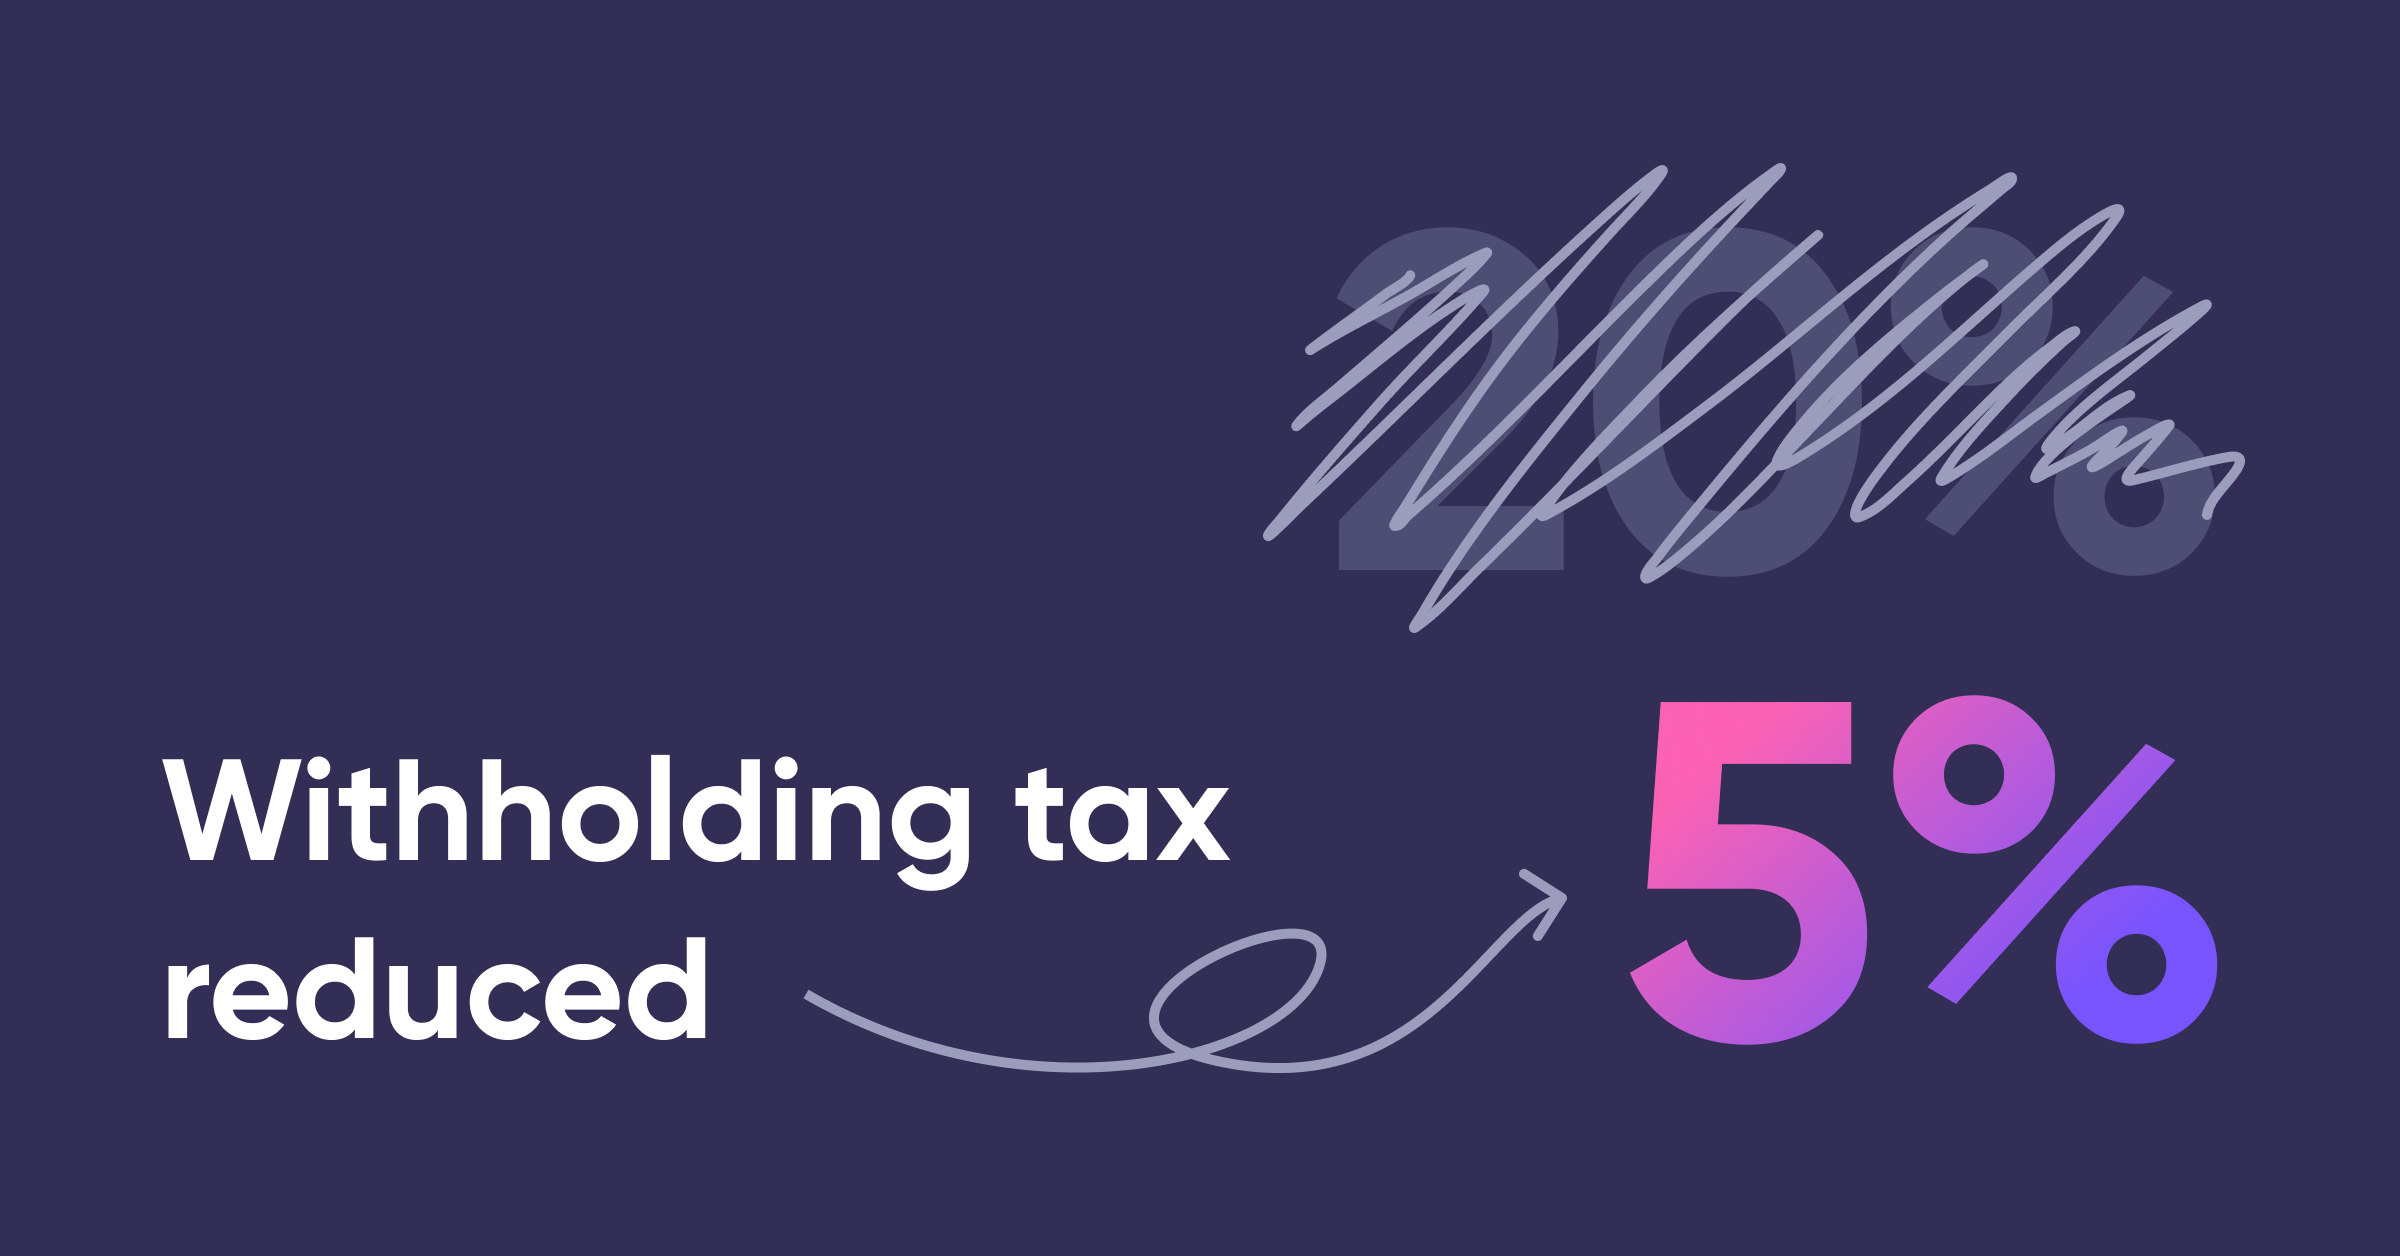 withholding-tax-reduced-to-5-for-eu-and-eea-tax-residents-debitum